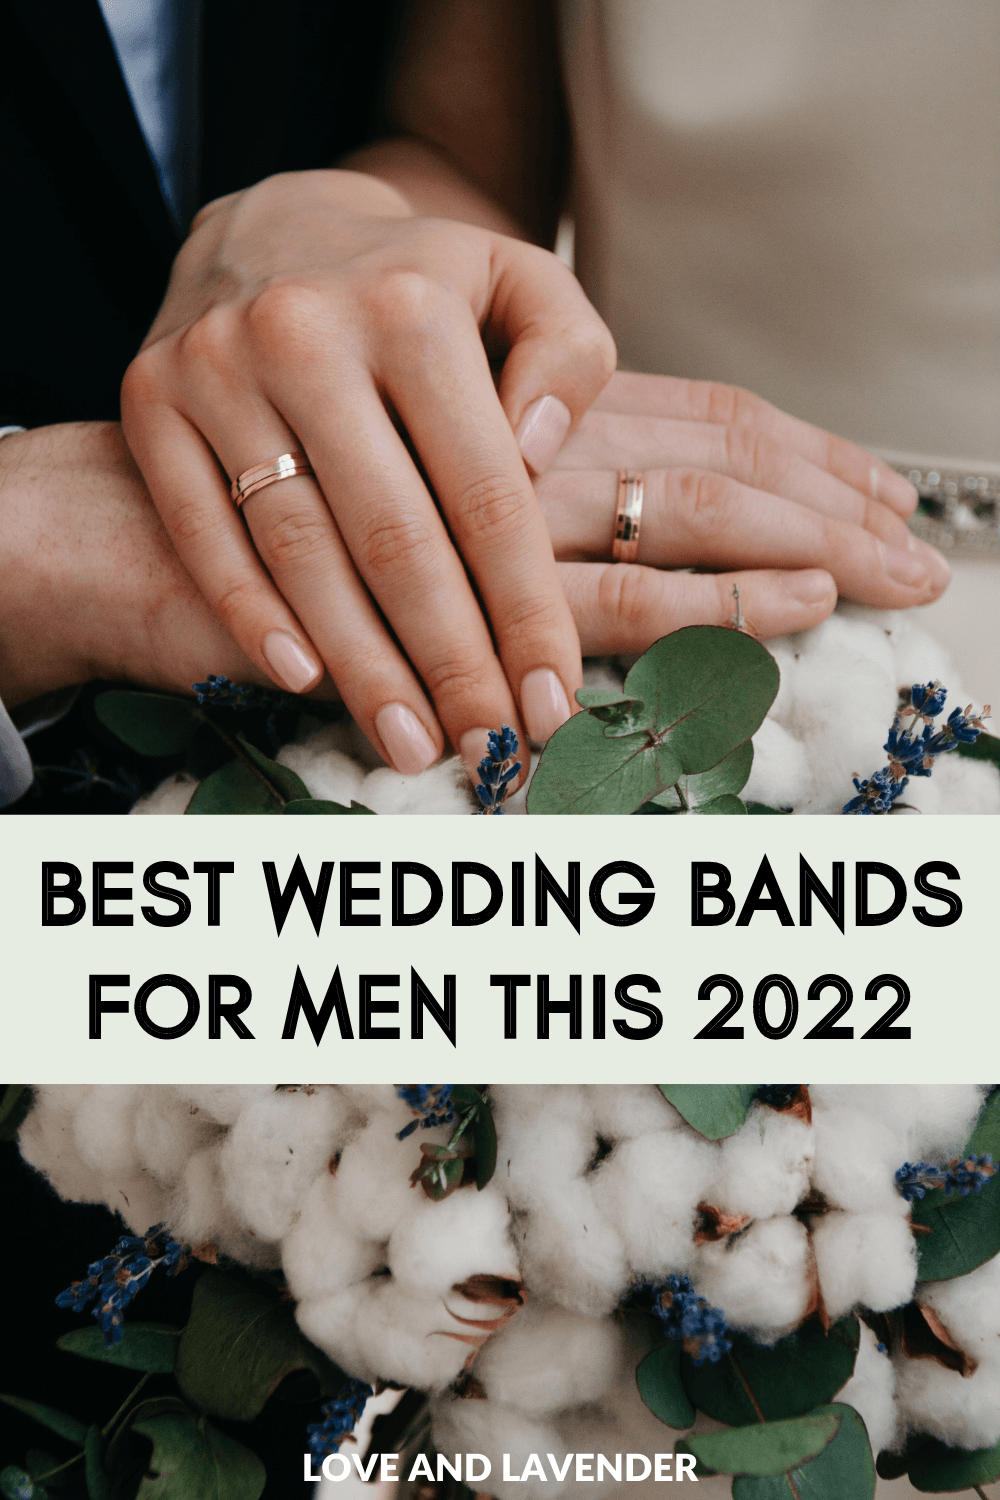 The key to finding a wedding band that fits comfortably and looks good is knowing what you are looking for. This list provides a wide range of options, from classic gold bands to unique black diamond creations that are sure to wow your partner on your big day. Don't miss it here!